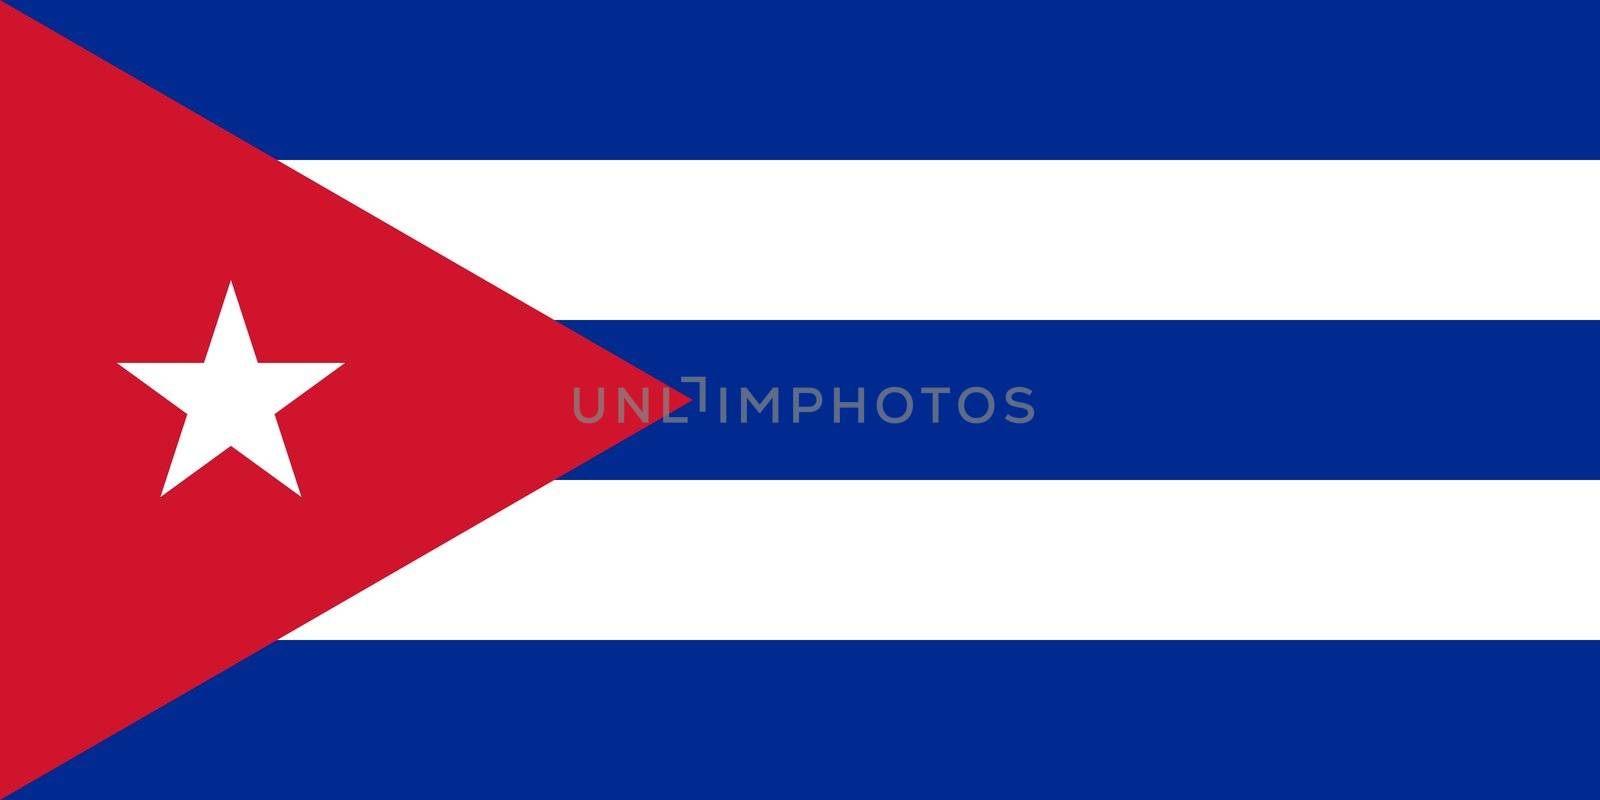 The national flag of Cuba by claudiodivizia